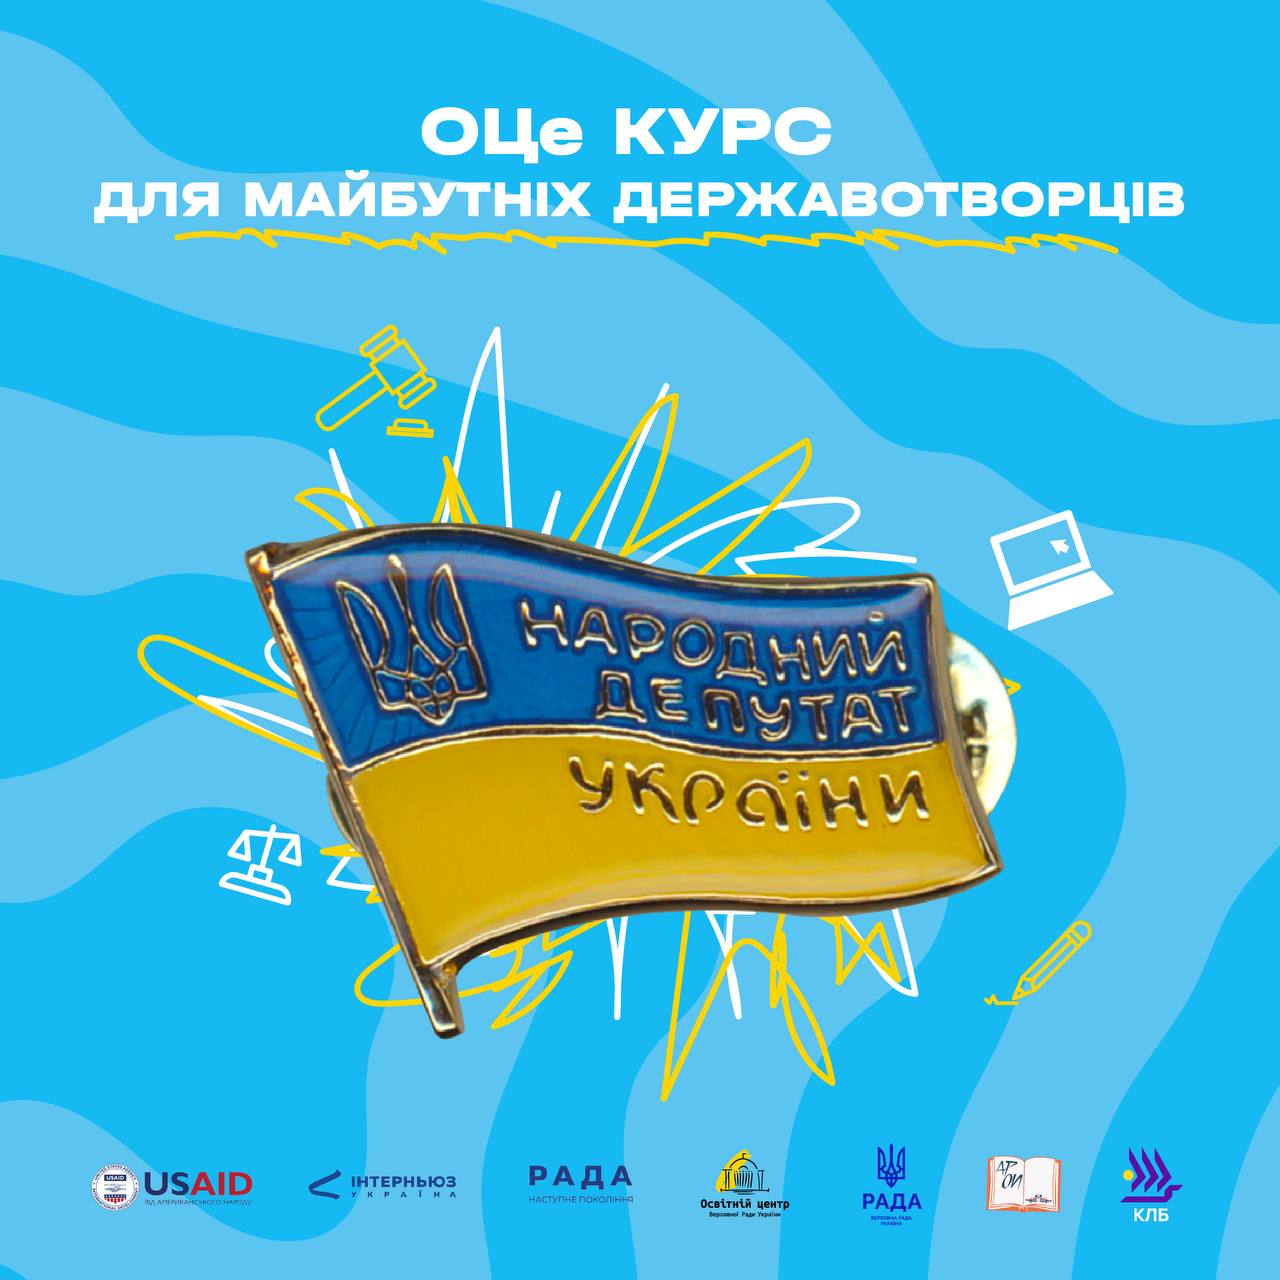 Educational Centre of the Verkhovna Rada of Ukraine invites students to a parliamentary course for future state-makers